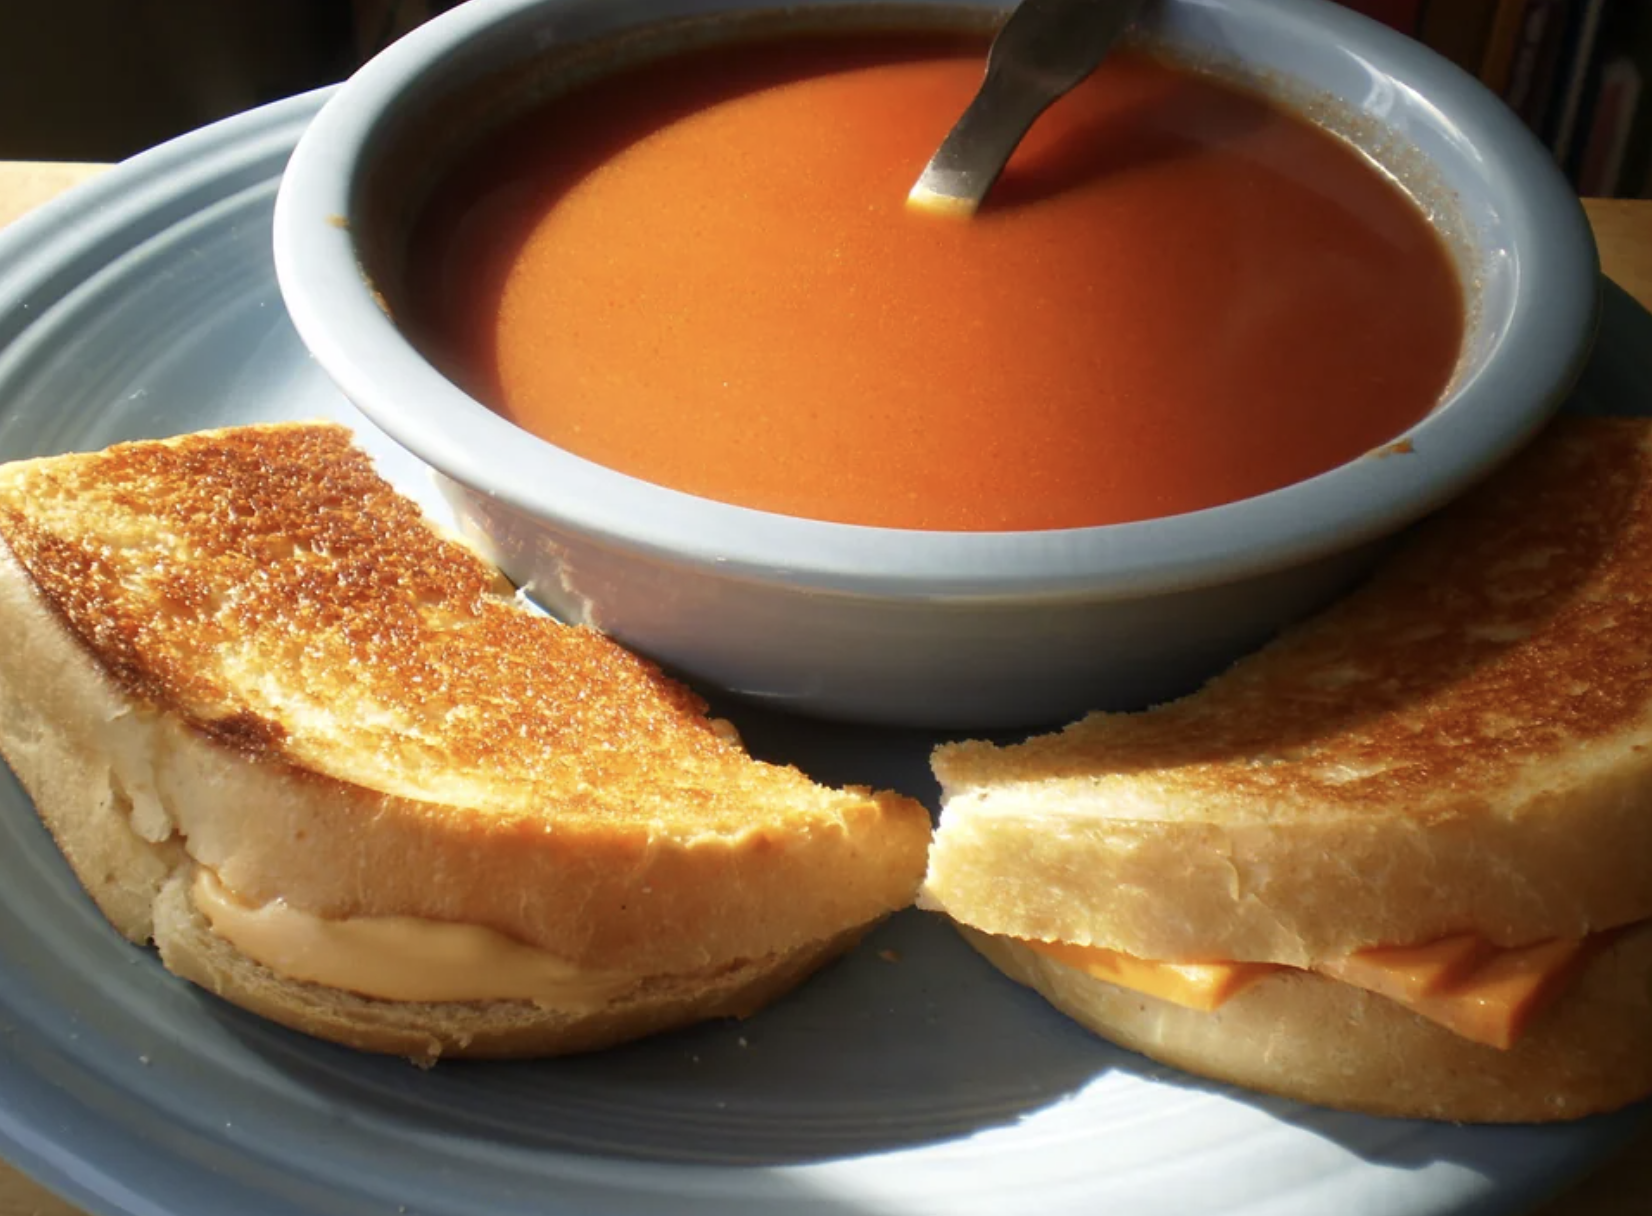 Grilled cheese and tomato soup.